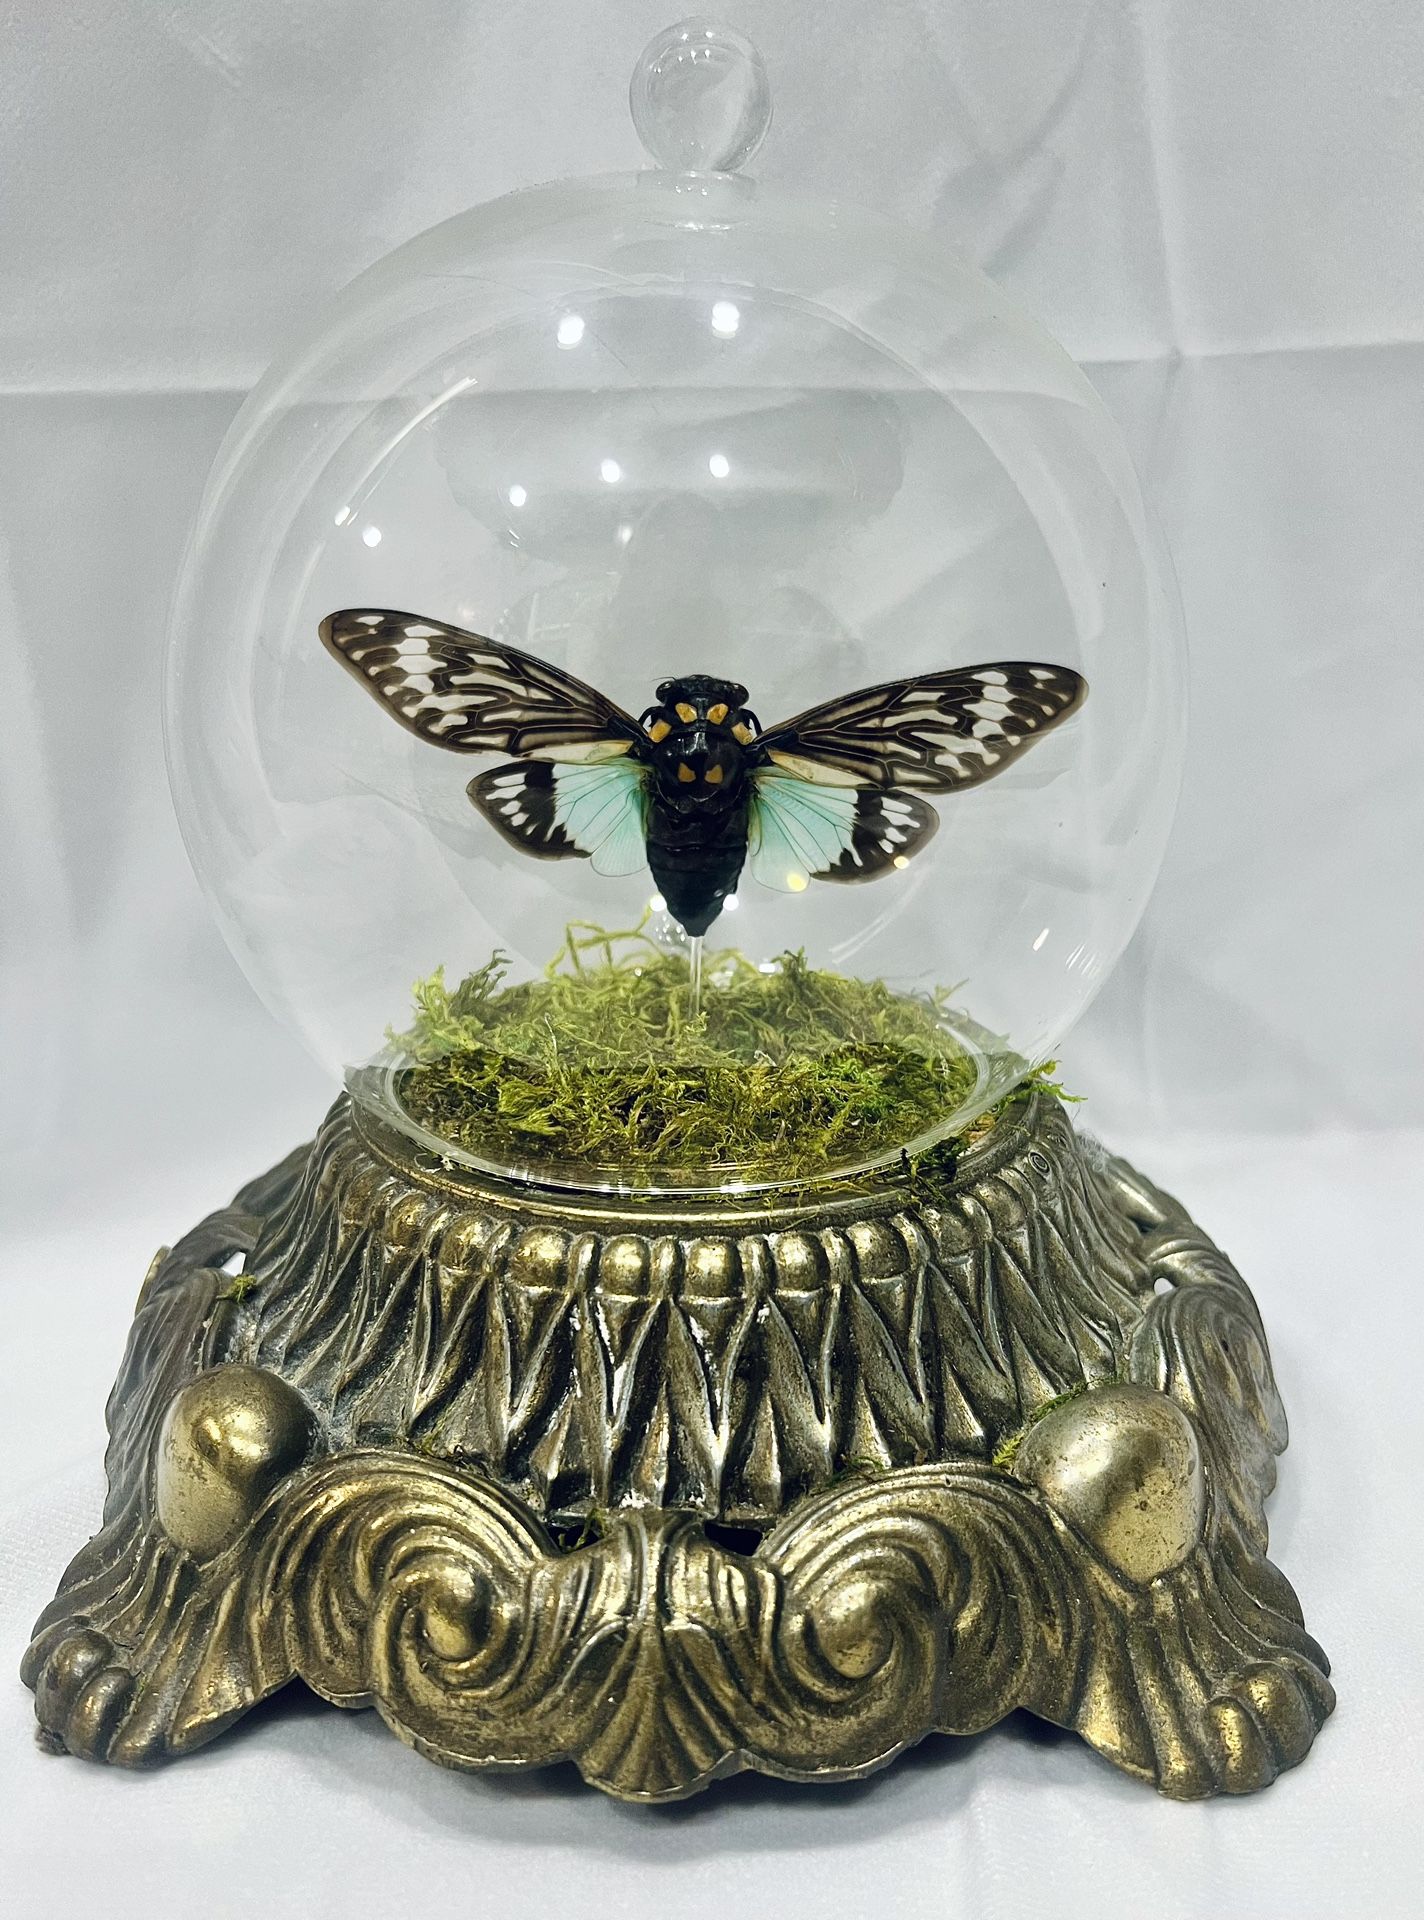 Preserved Blue Winged Cicada in Glass Dome with Antique Brass Lamp Base and Moss